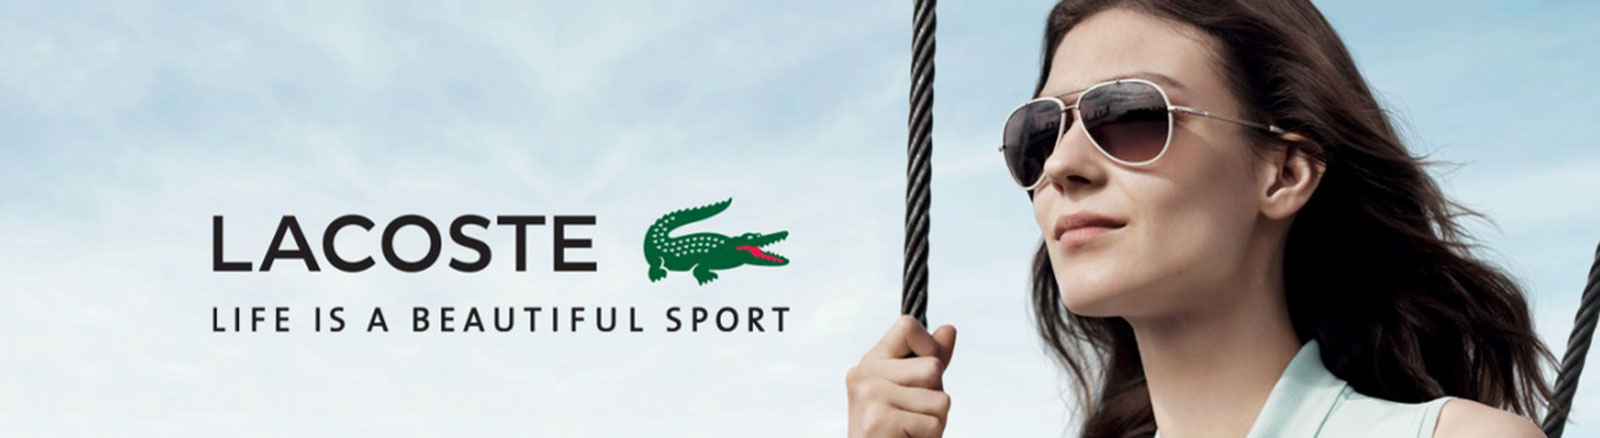 LACOSTE BANNER